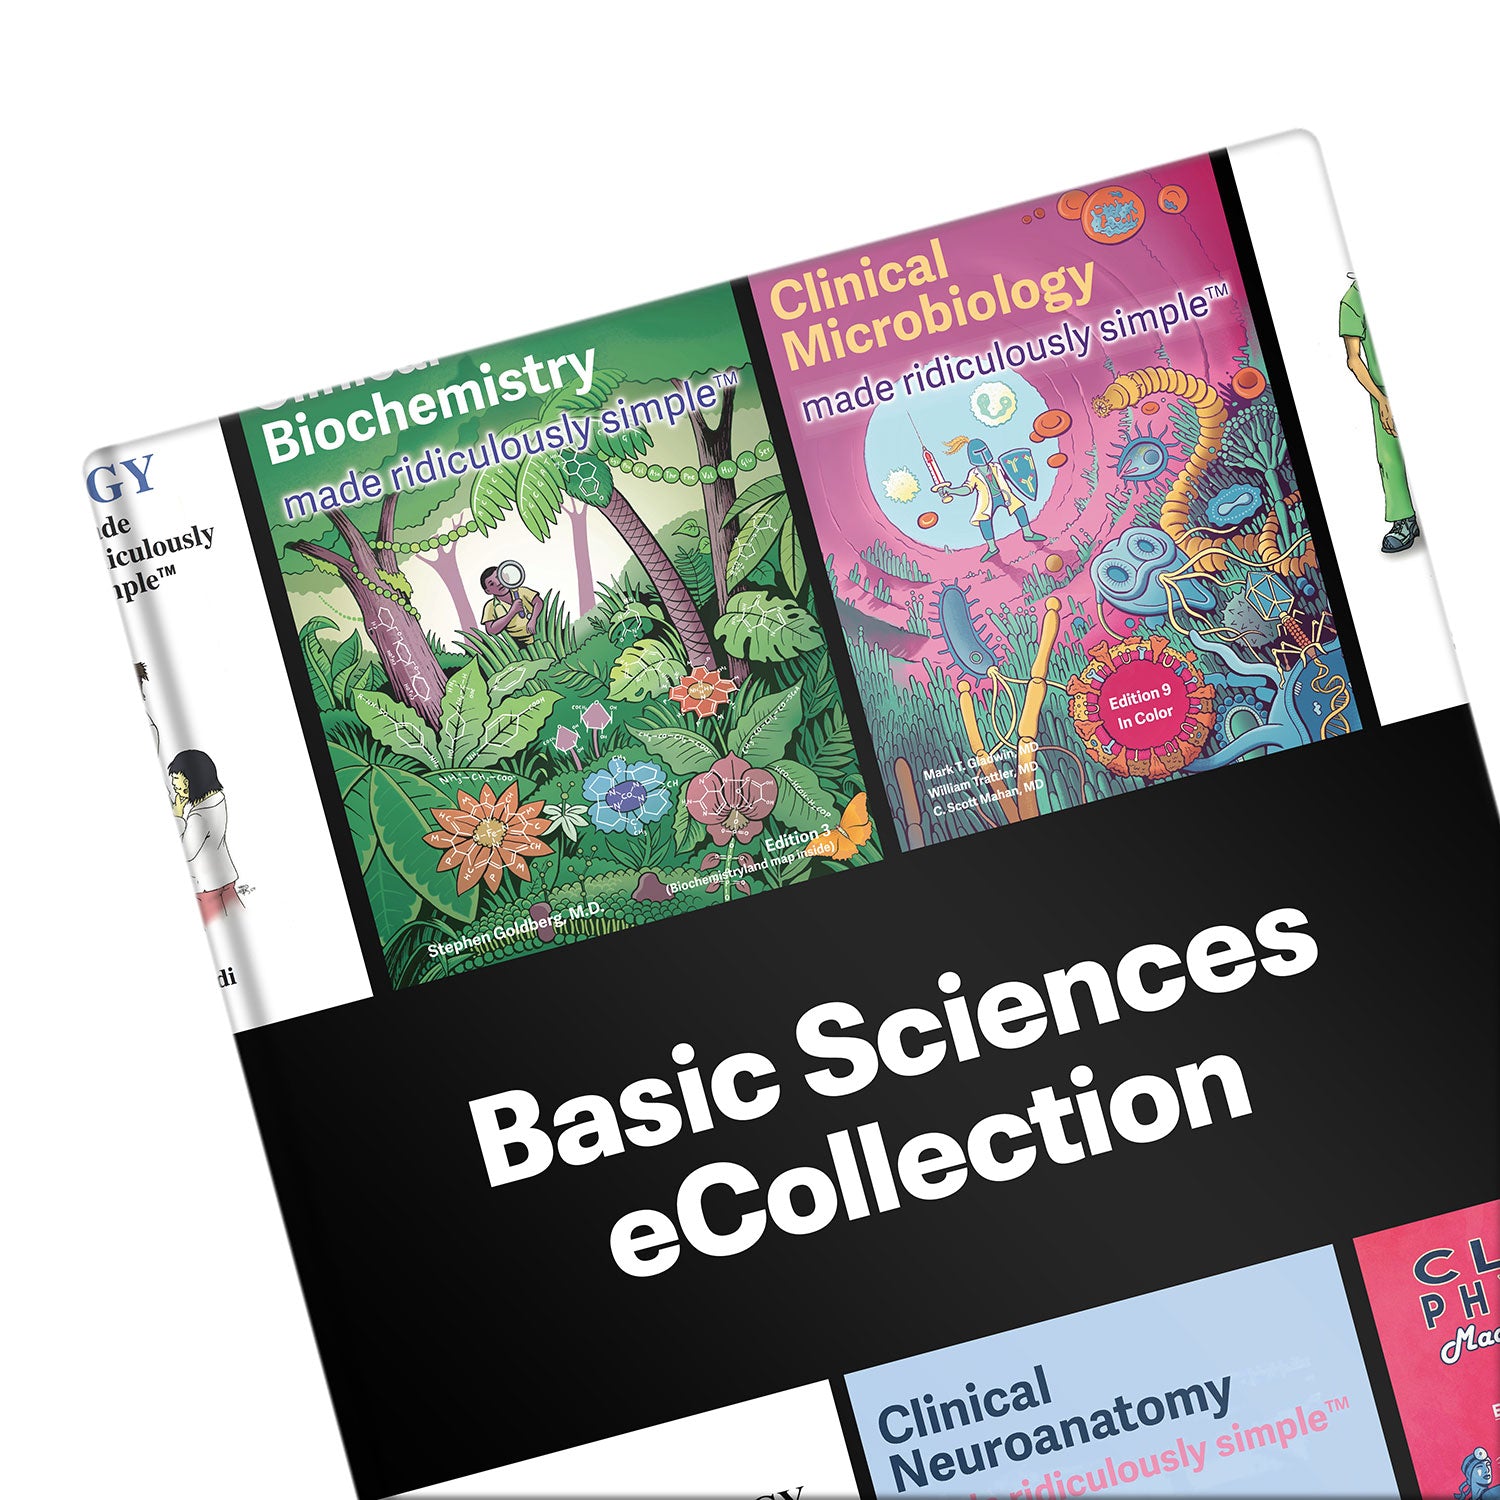 Basic Sciences eCollection